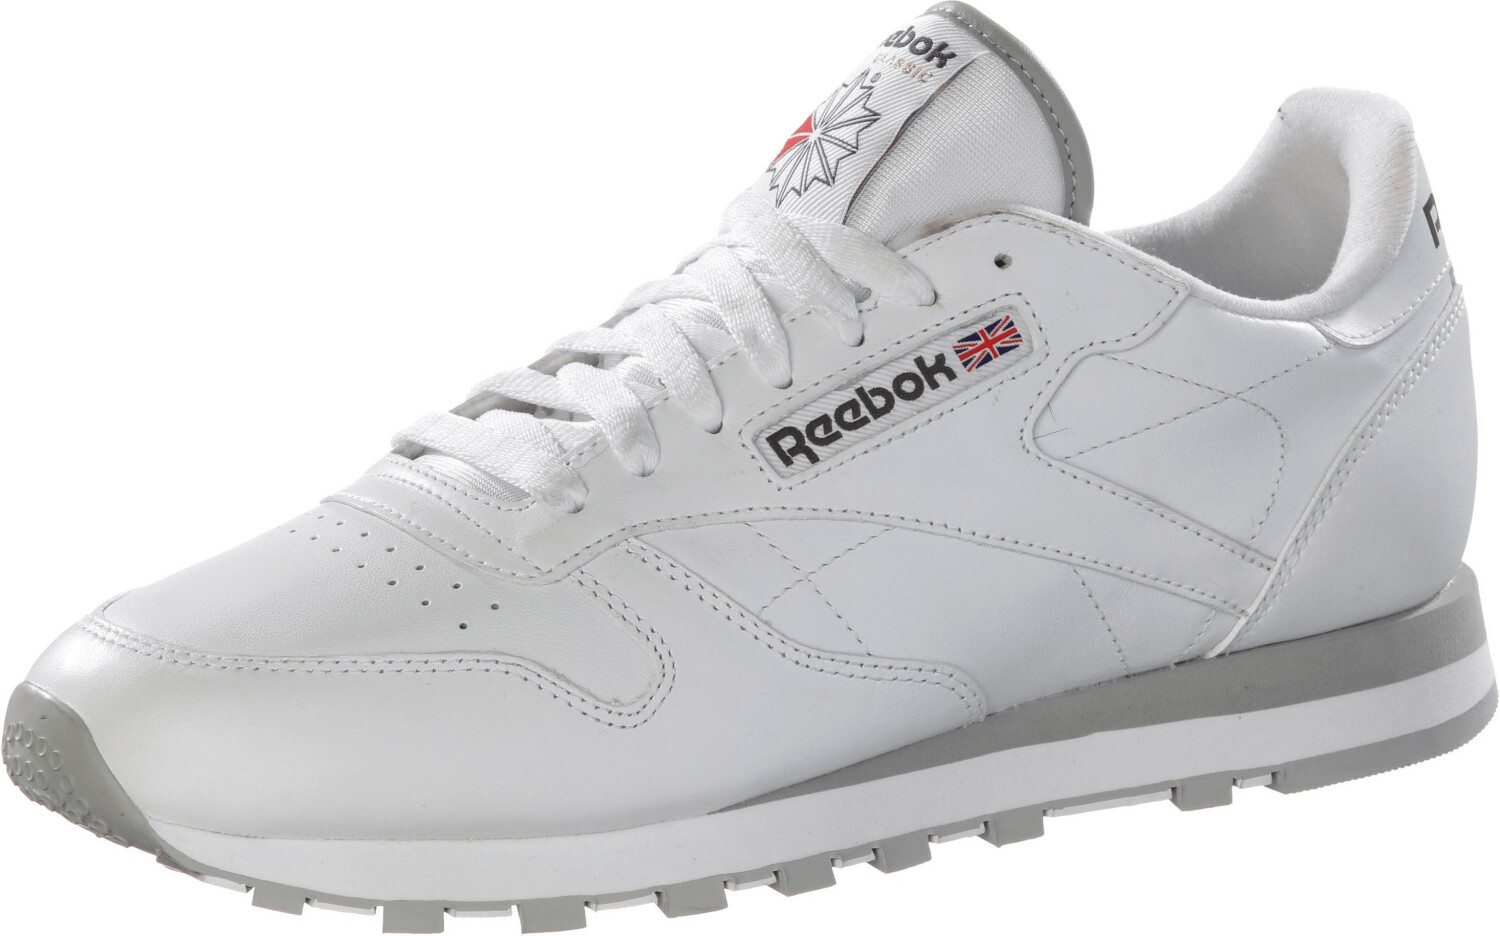 Buy Reebok Classic Leather from £24.00 